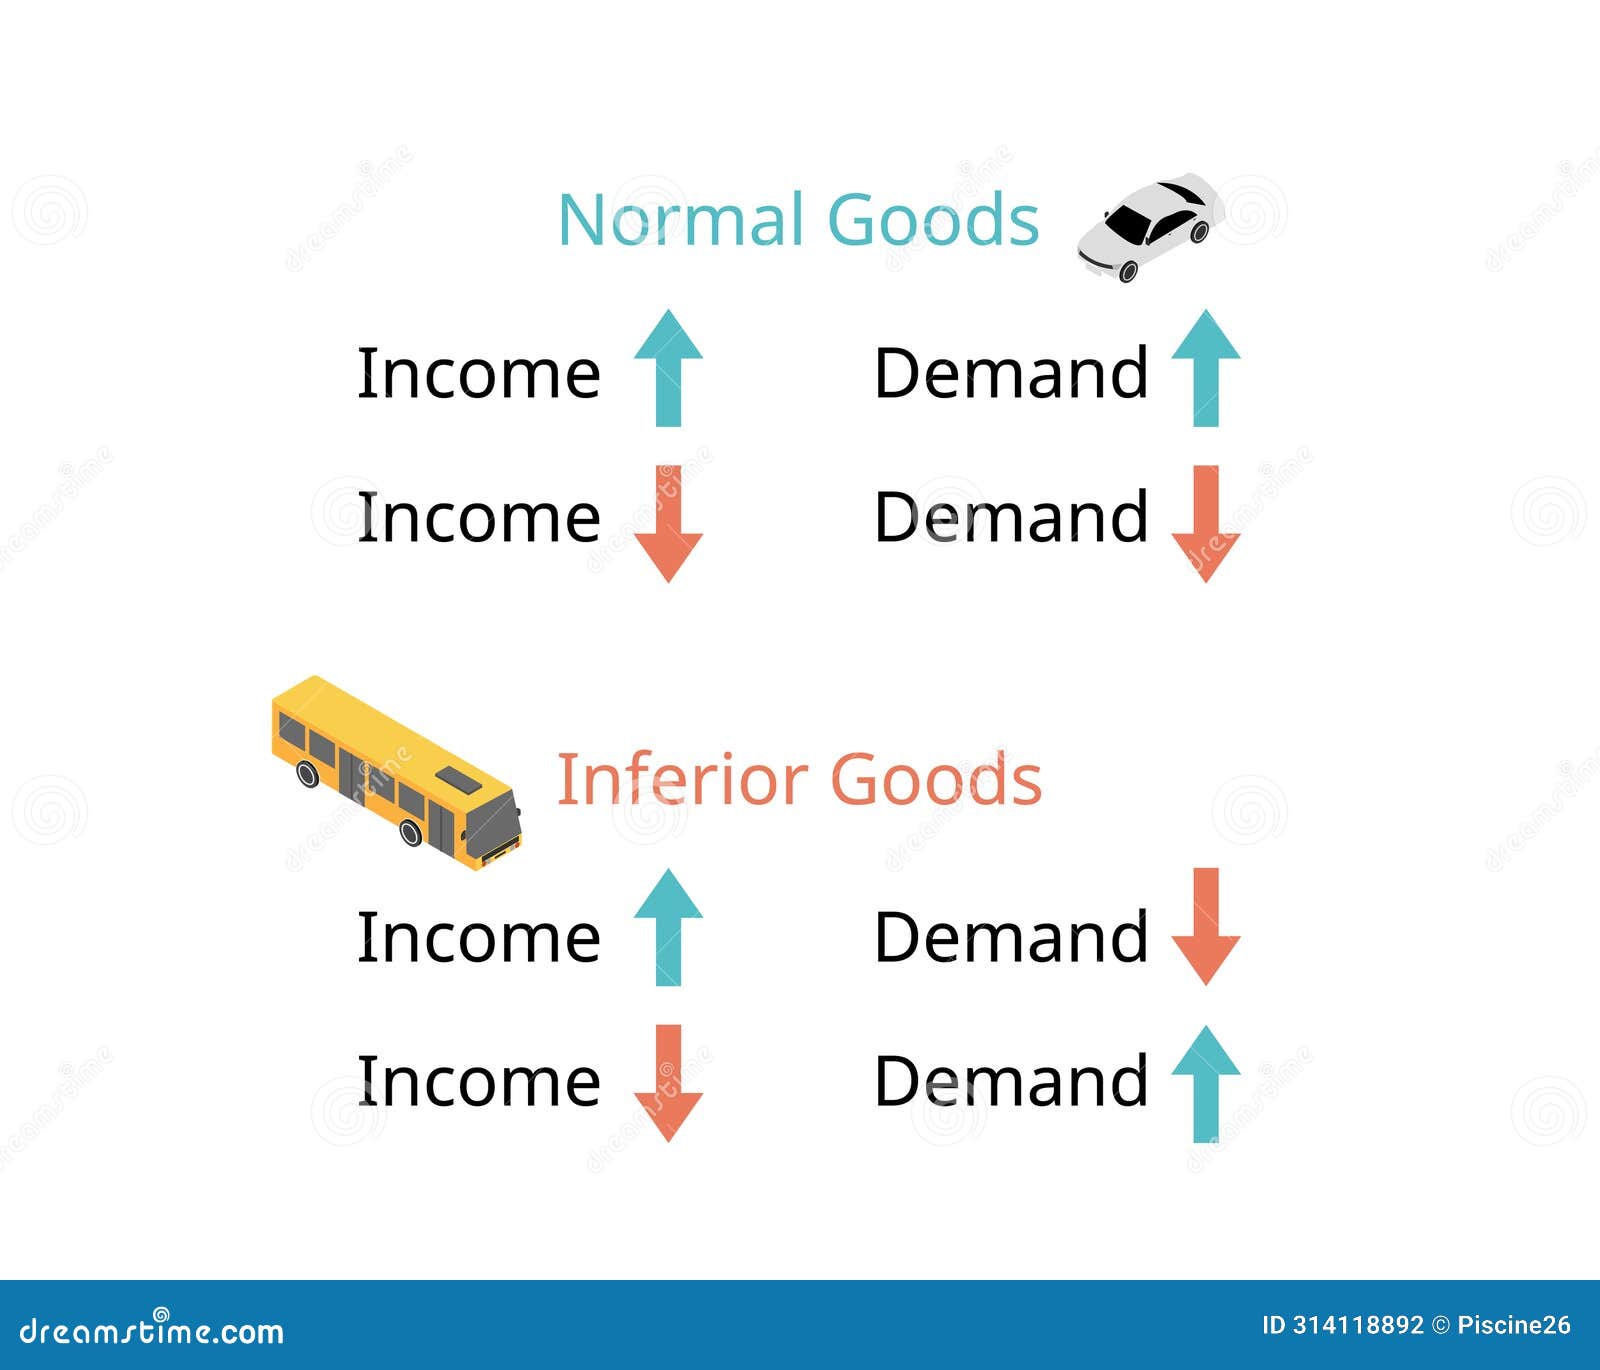 income elasticity of demand and types of goods for normal goods and inferior goods